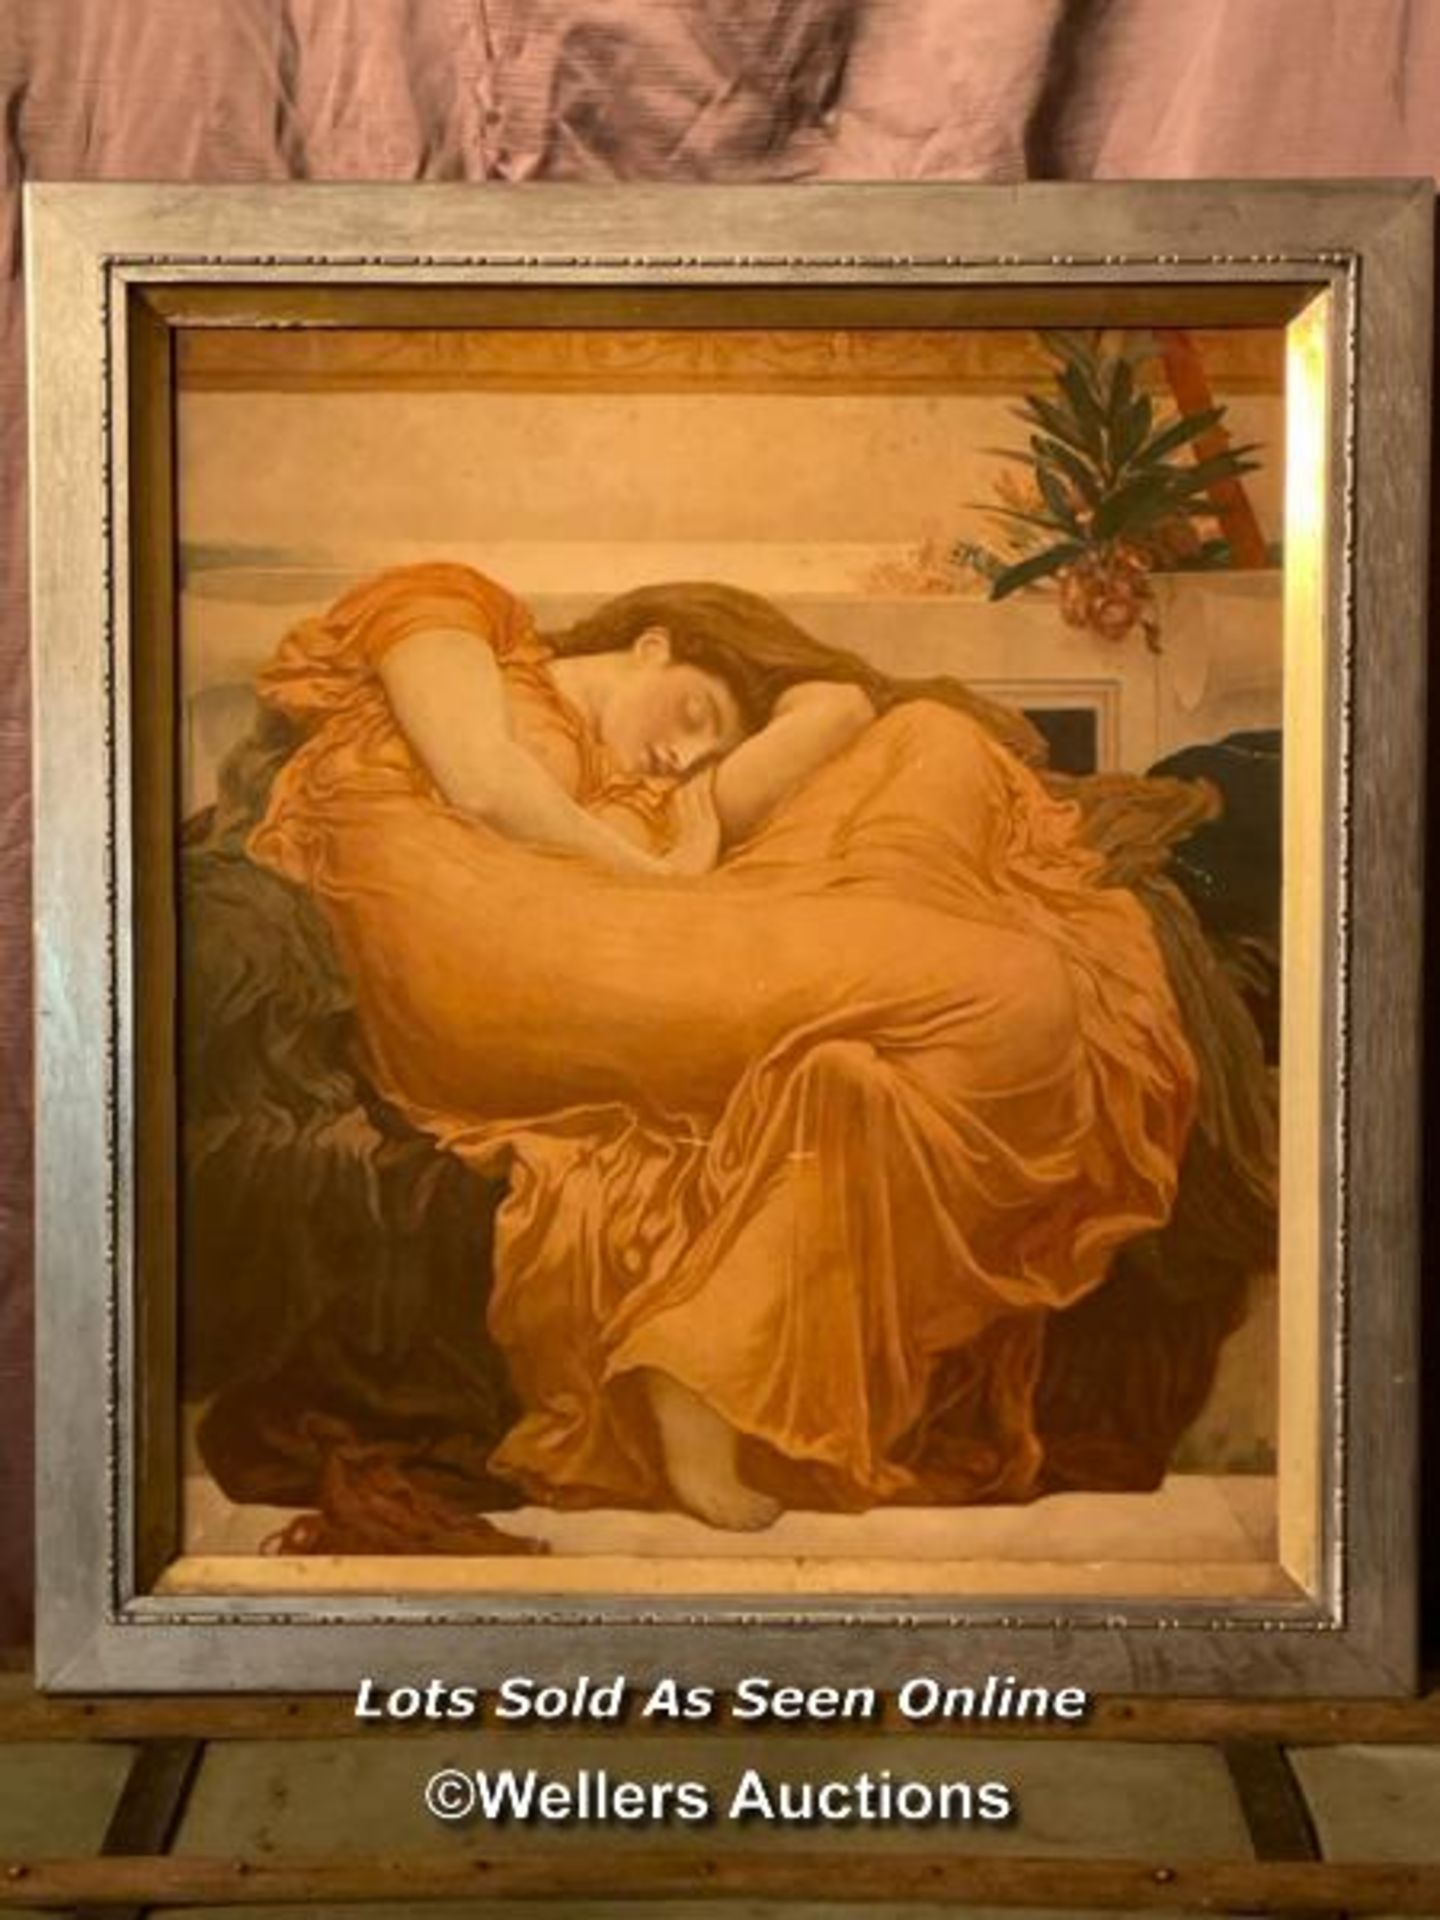 FRAMED LITHOGRAPH OF A SLEEPING LADY, 57 X 63.5CM, FRAME SIZE 71 X 77CM